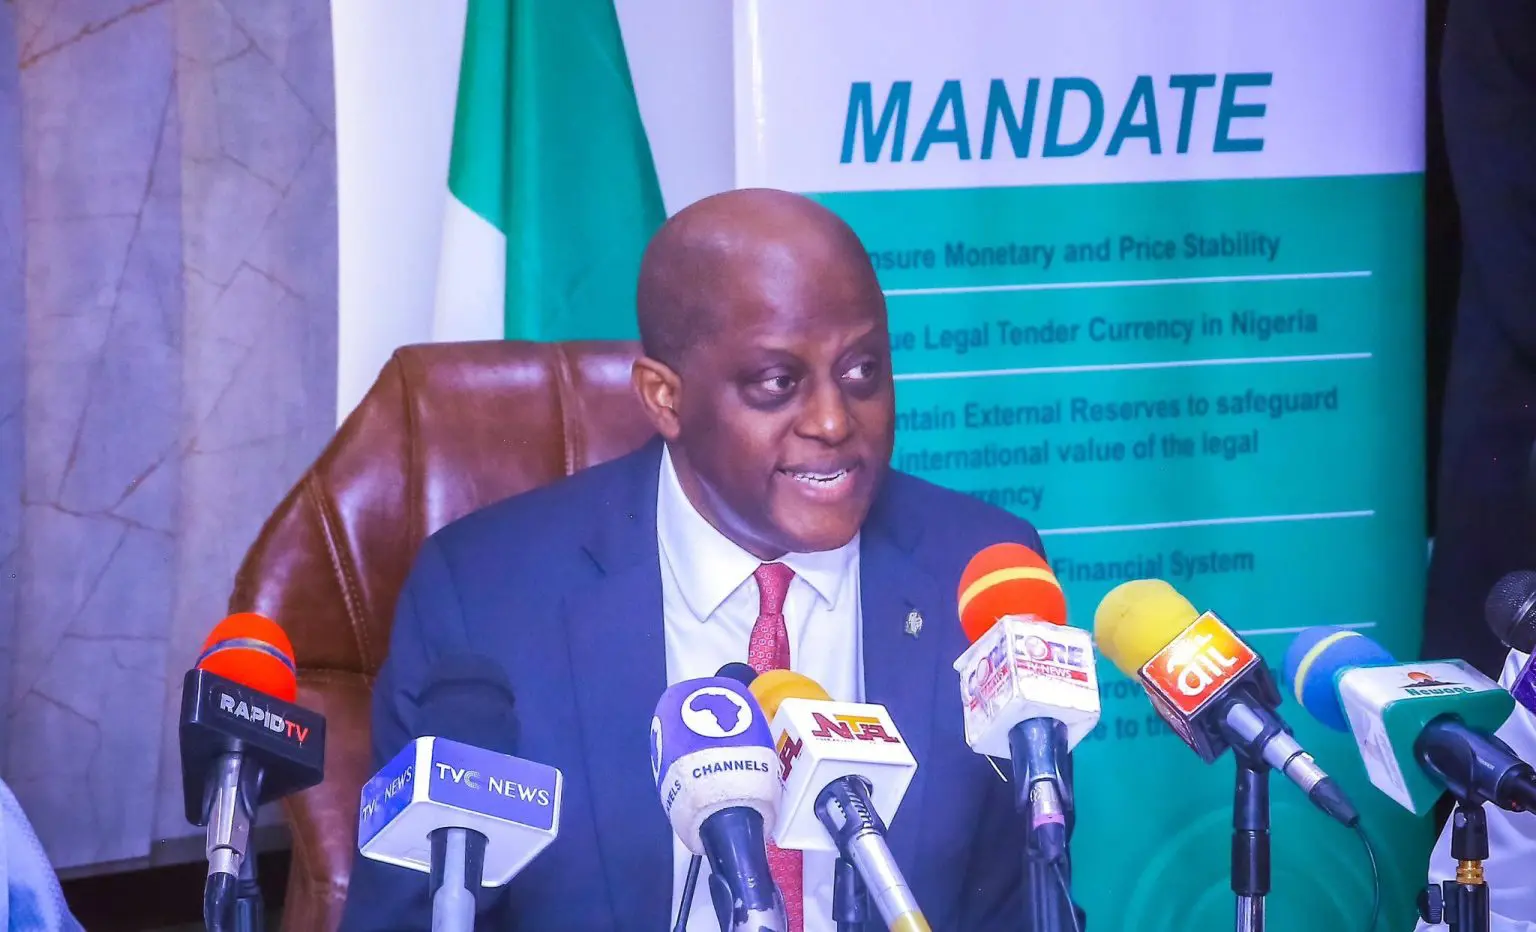 CBN: Cardoso reveals what MPC will do to bring down Nigeria’s inflation